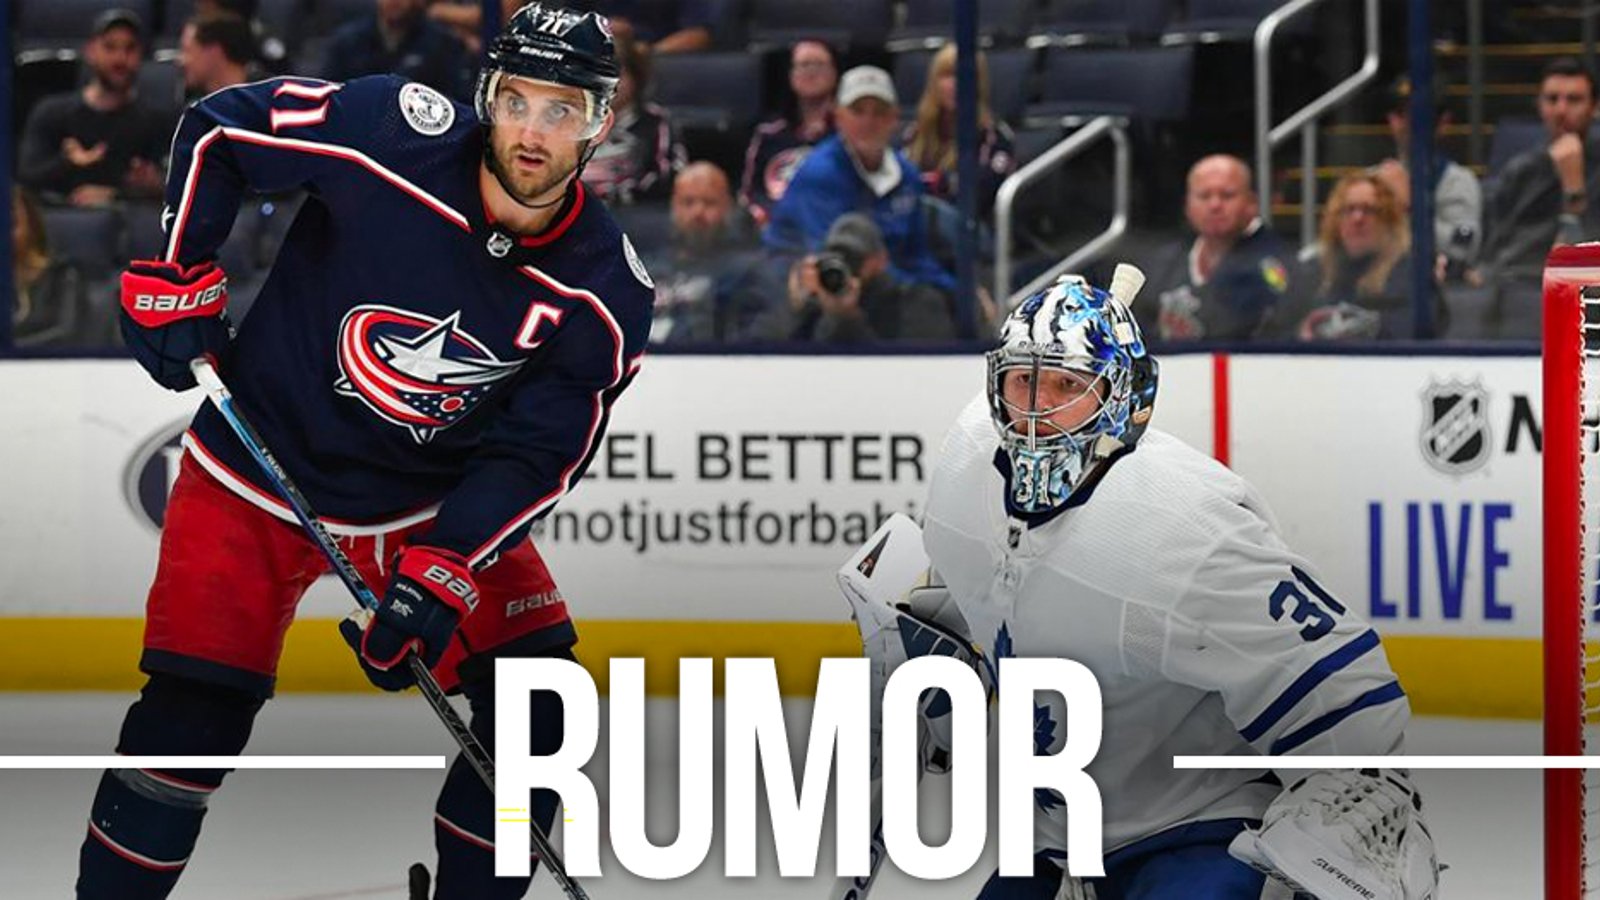 Report: Leafs set to acquire Blue Jackets' captain Nick Foligno